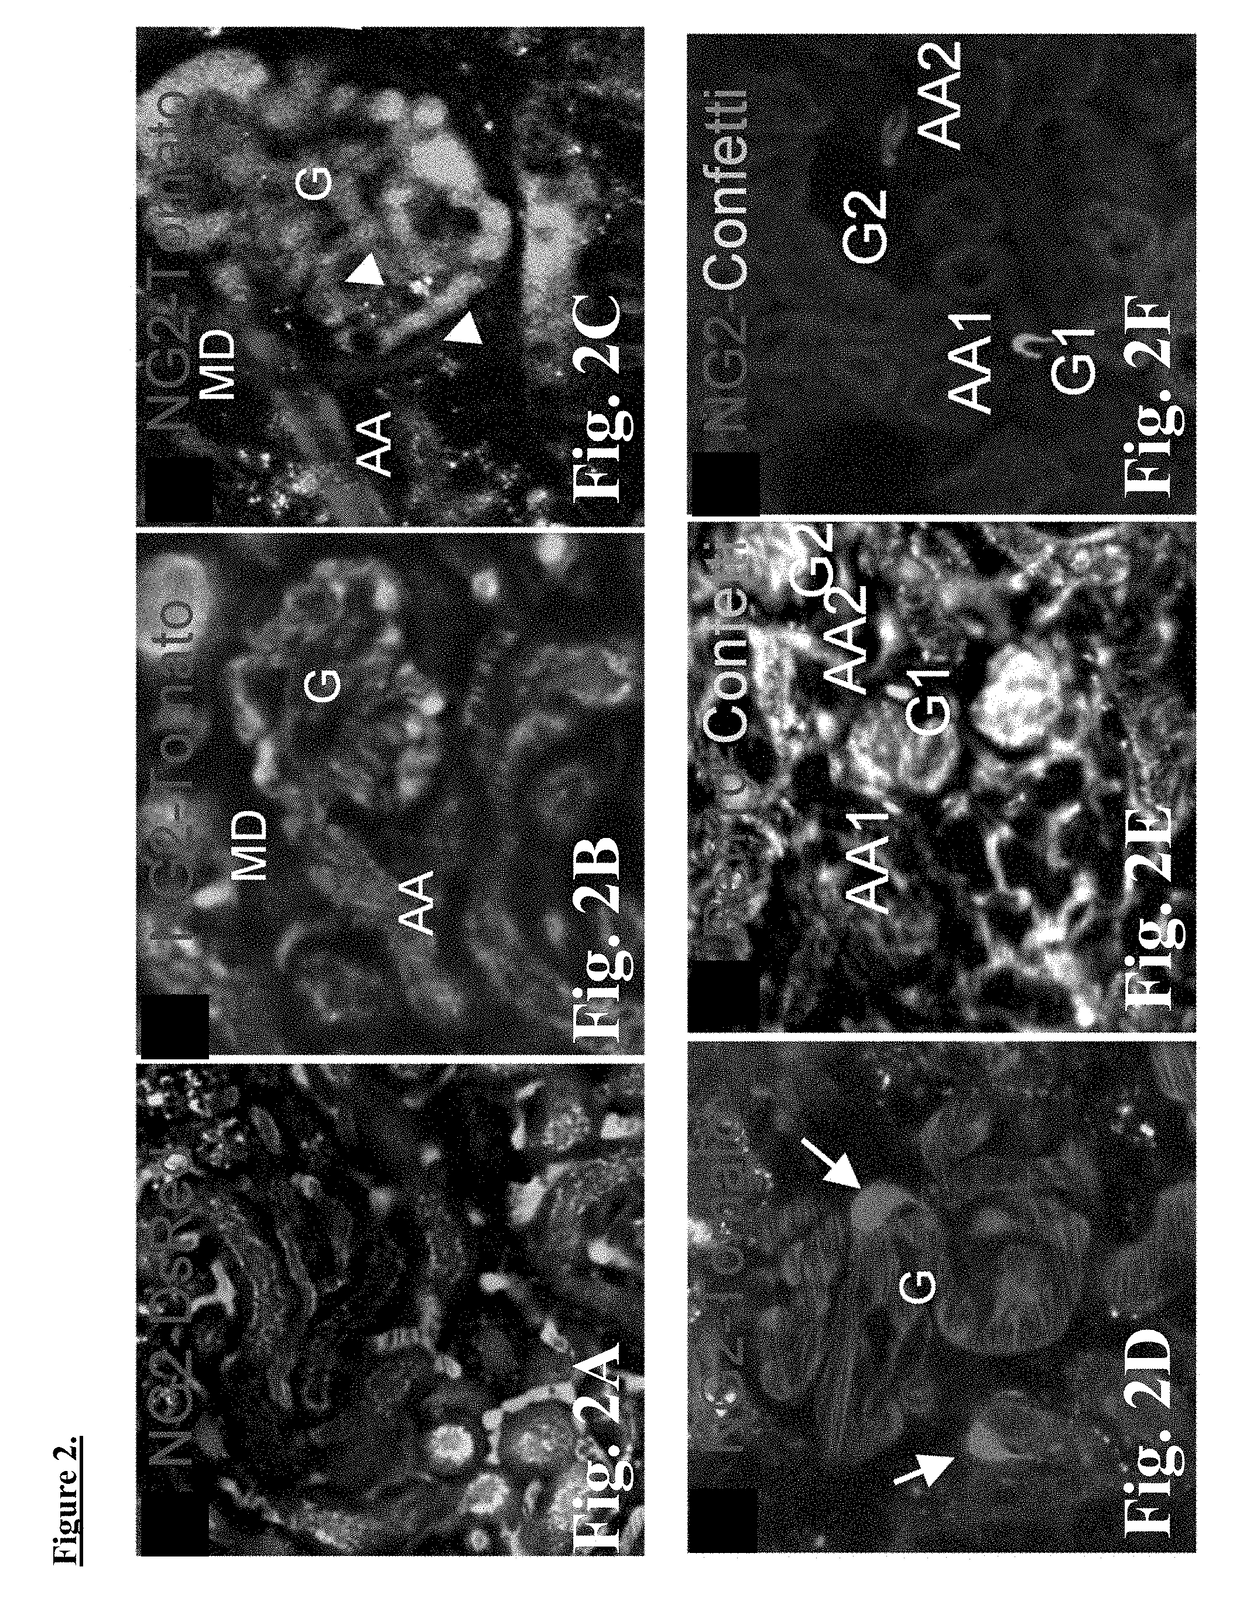 Targeting macula densa cells as a new therapeutic approach for kidney disease